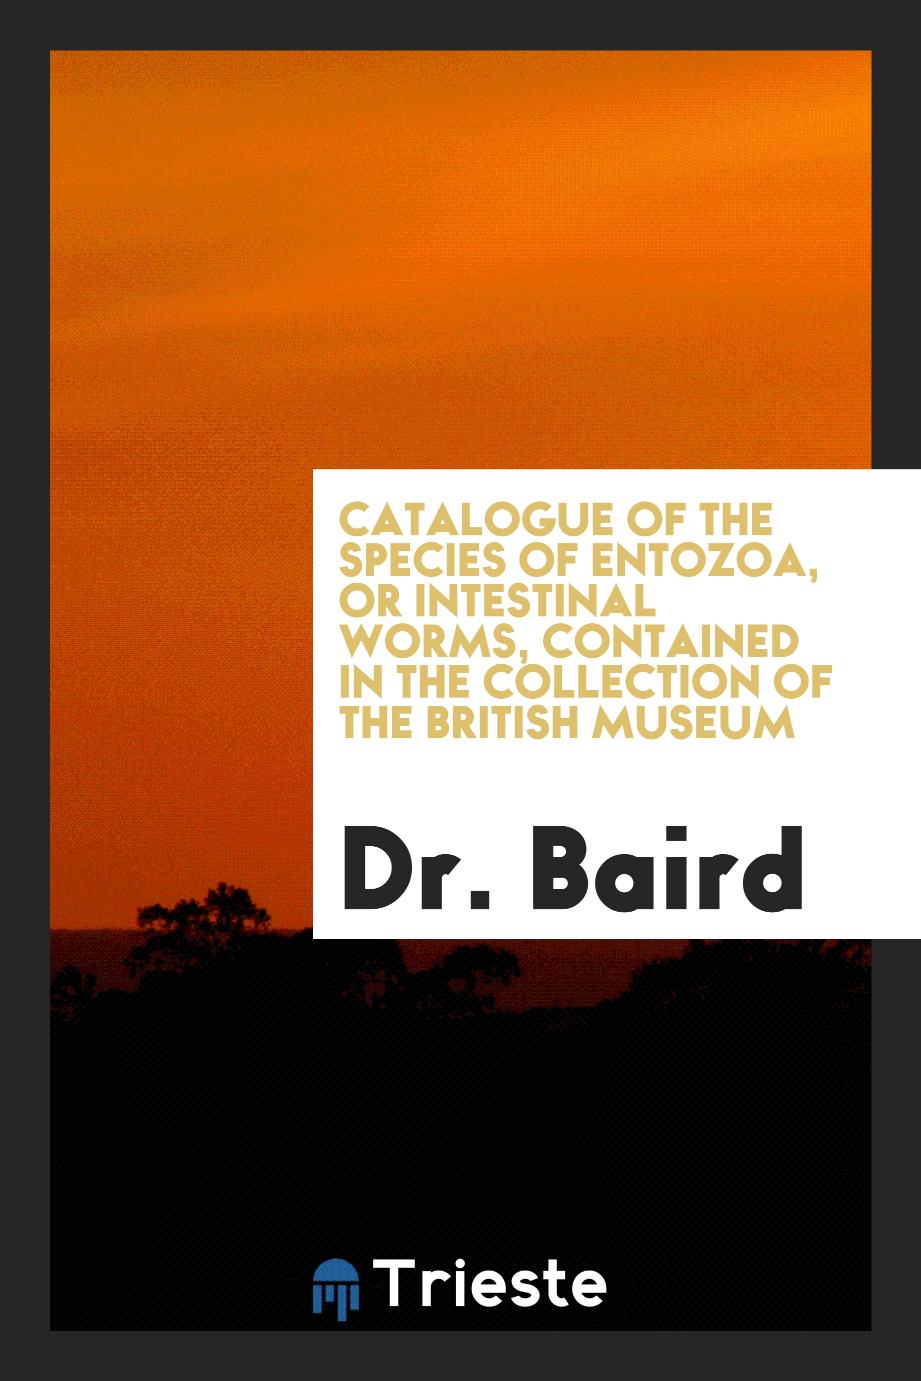 Dr. Baird - Catalogue of the Species of Entozoa, or Intestinal Worms, Contained in the Collection of the British Museum